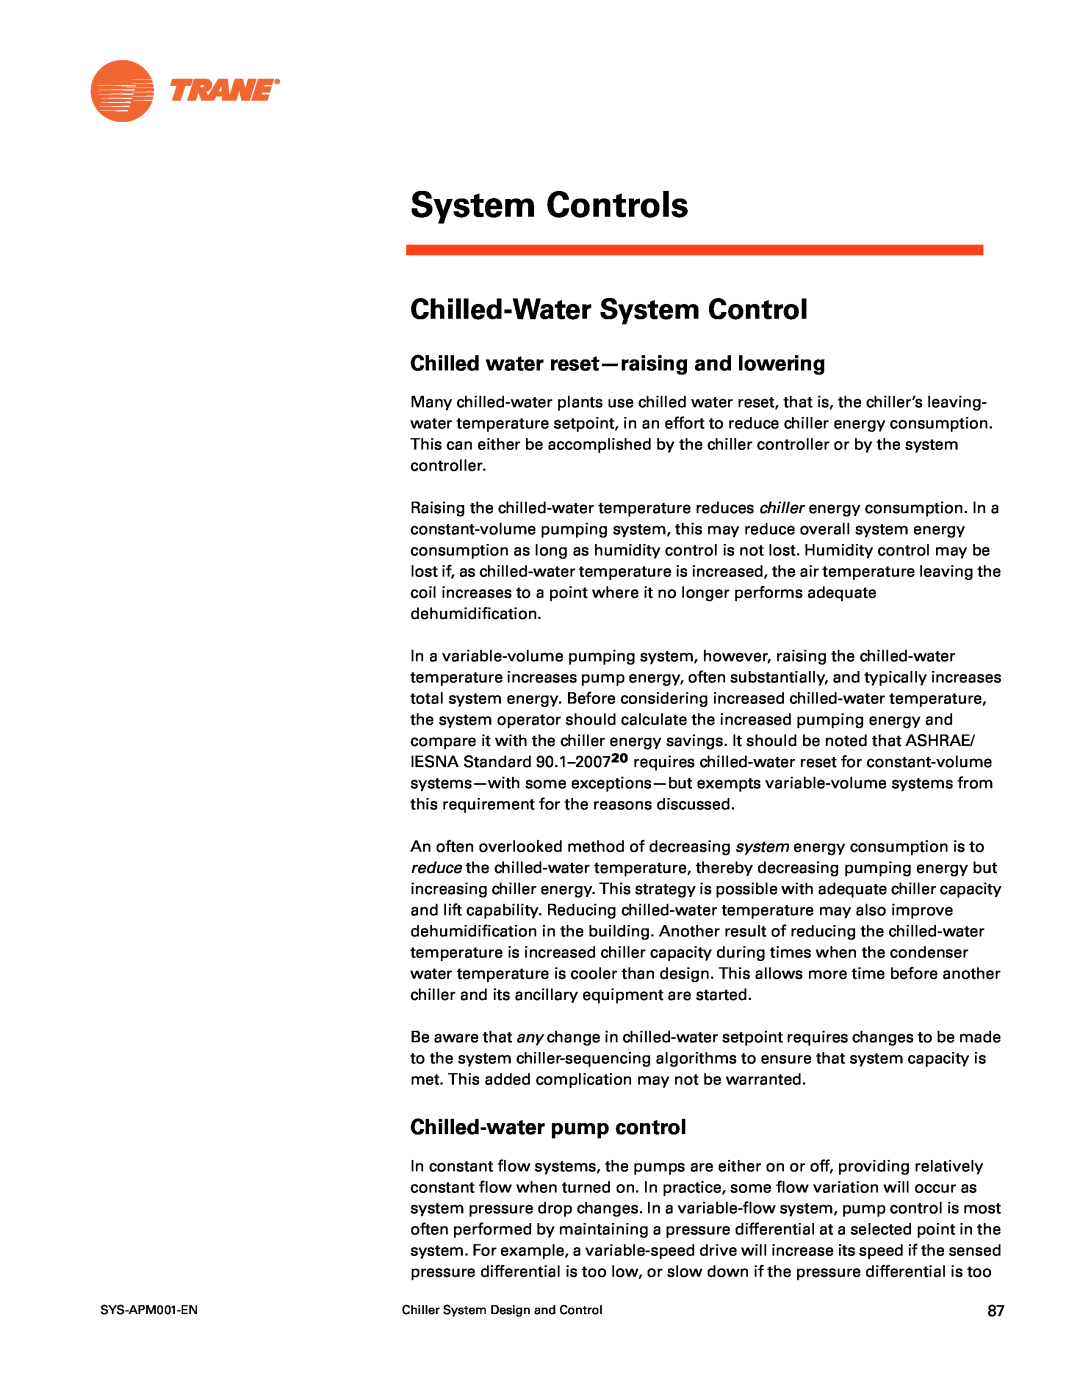 Trane SYS-APM001-EN manual System Controls, Chilled-Water System Control, Chilled water reset-raising and lowering 